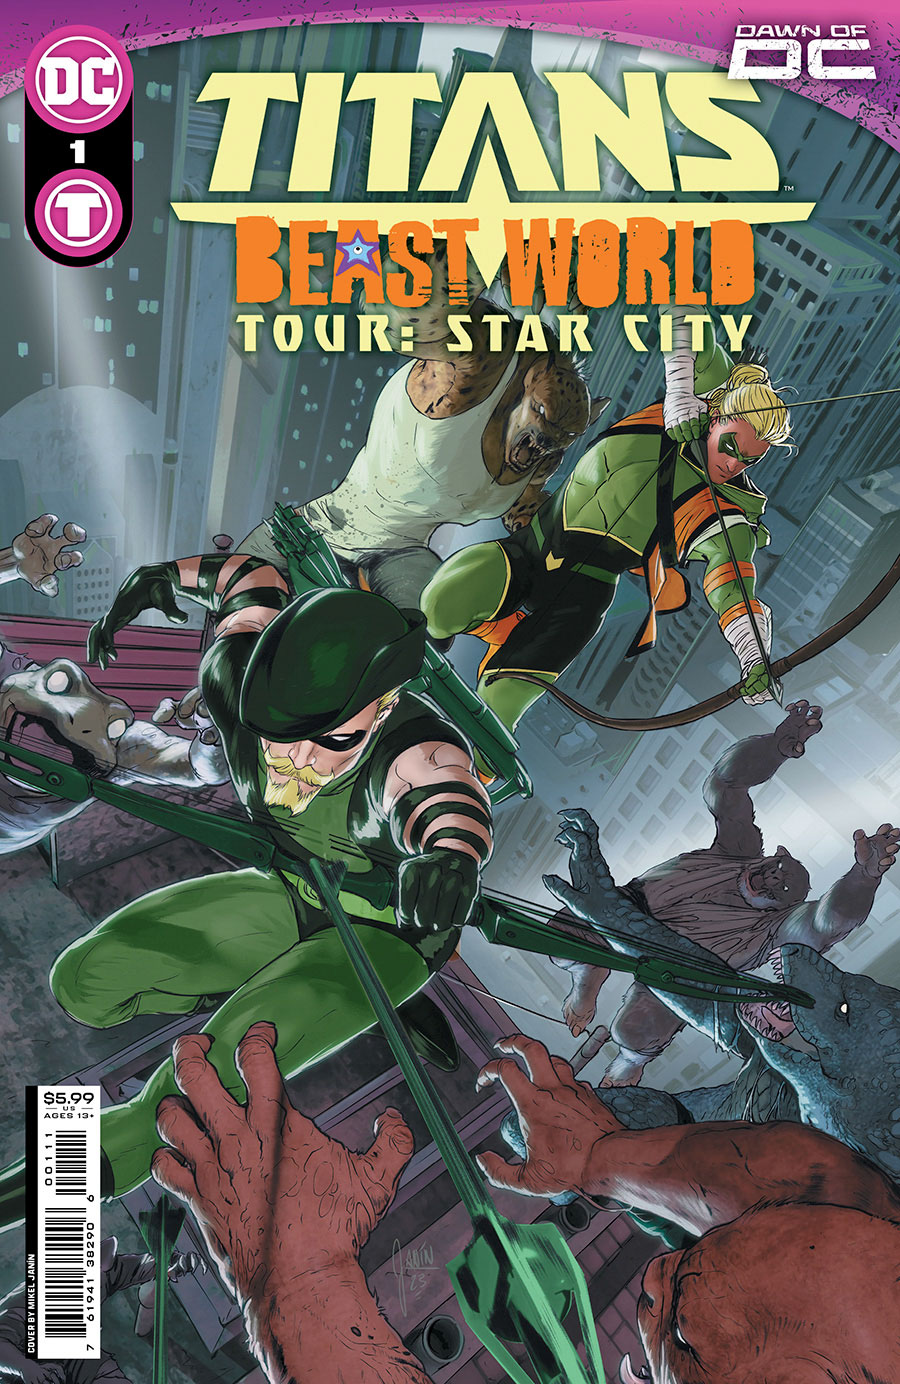 Titans Beast World Tour Star City #1 (One Shot) Cover A Regular Mikel Janin Cover